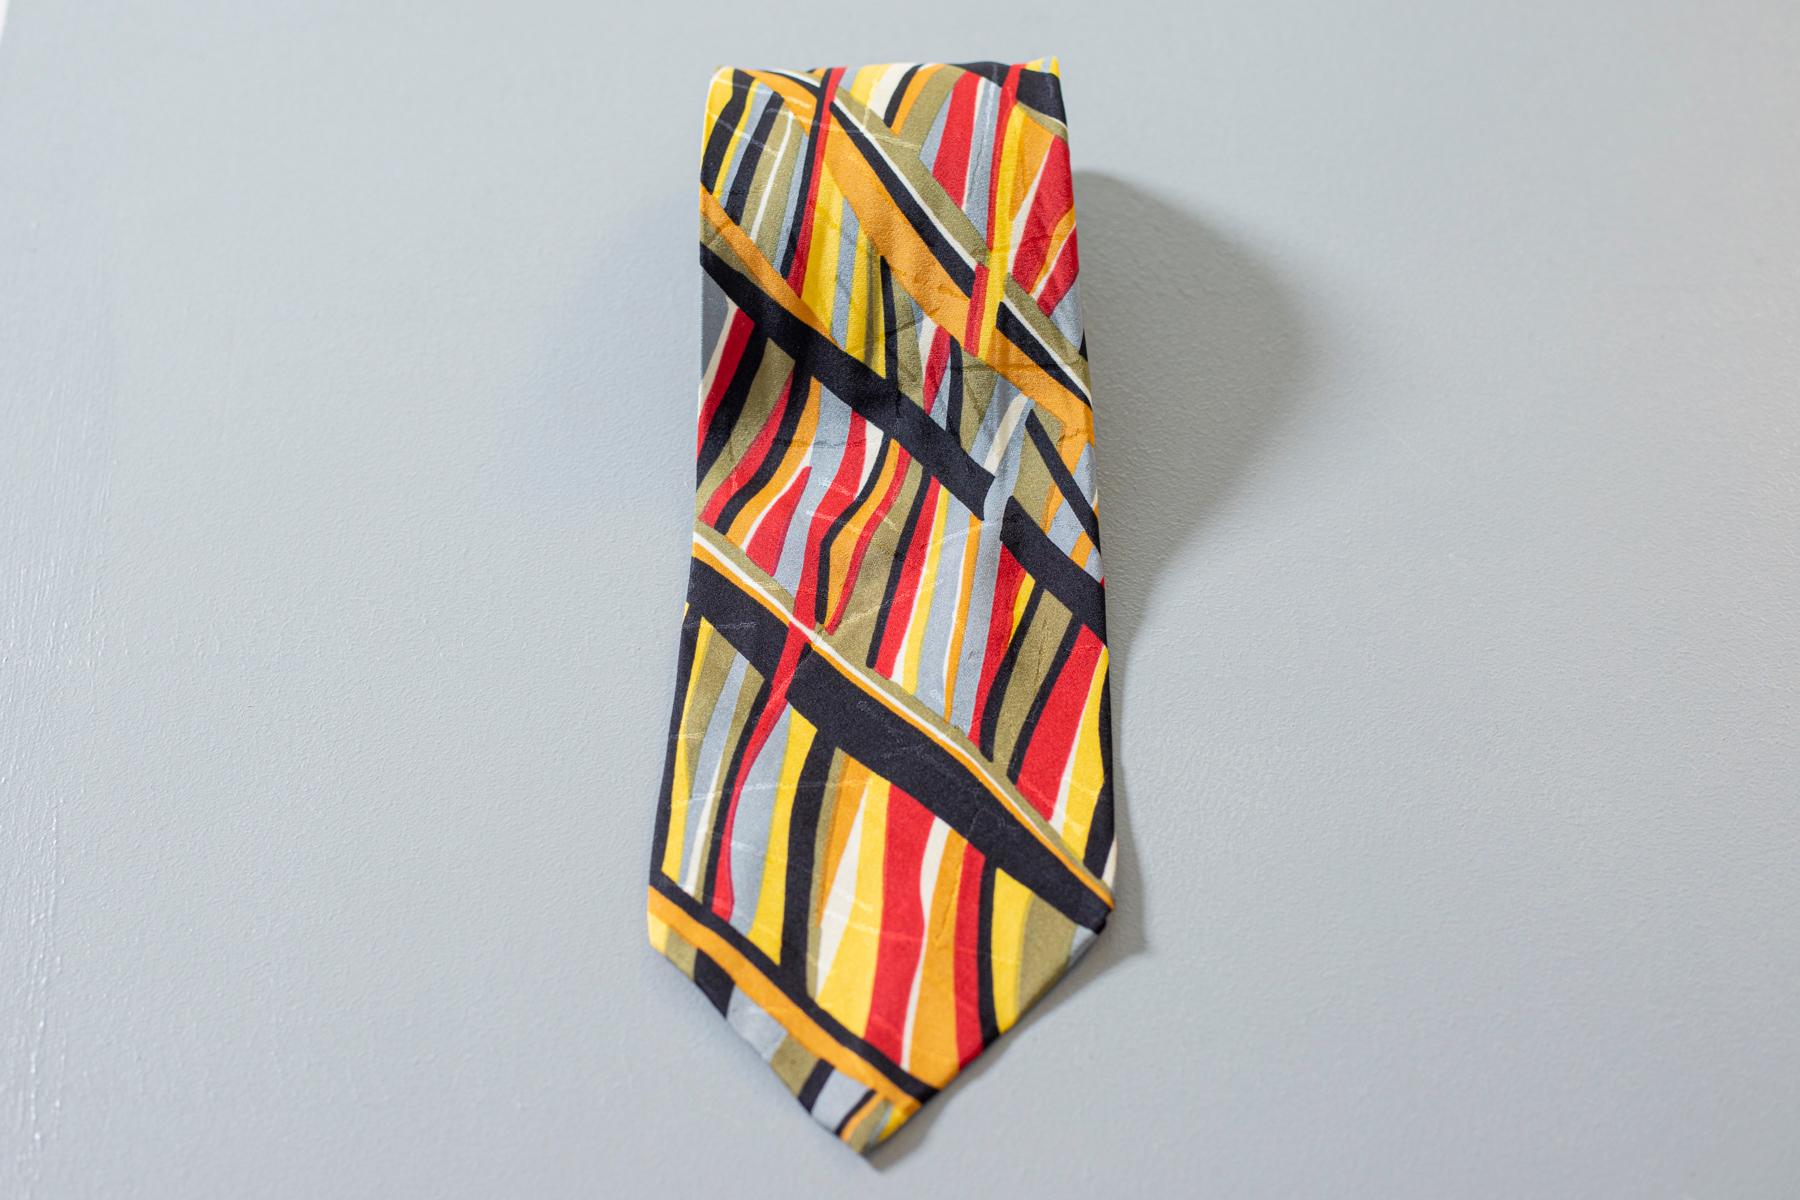 This eccentric tie designed by P&P collection is made in all-silk. It is elegant and never boring: very colorful and decorated with different shapes, the warm colors make it a perfect tie for a summer evening to combine with a white shirt. This tie